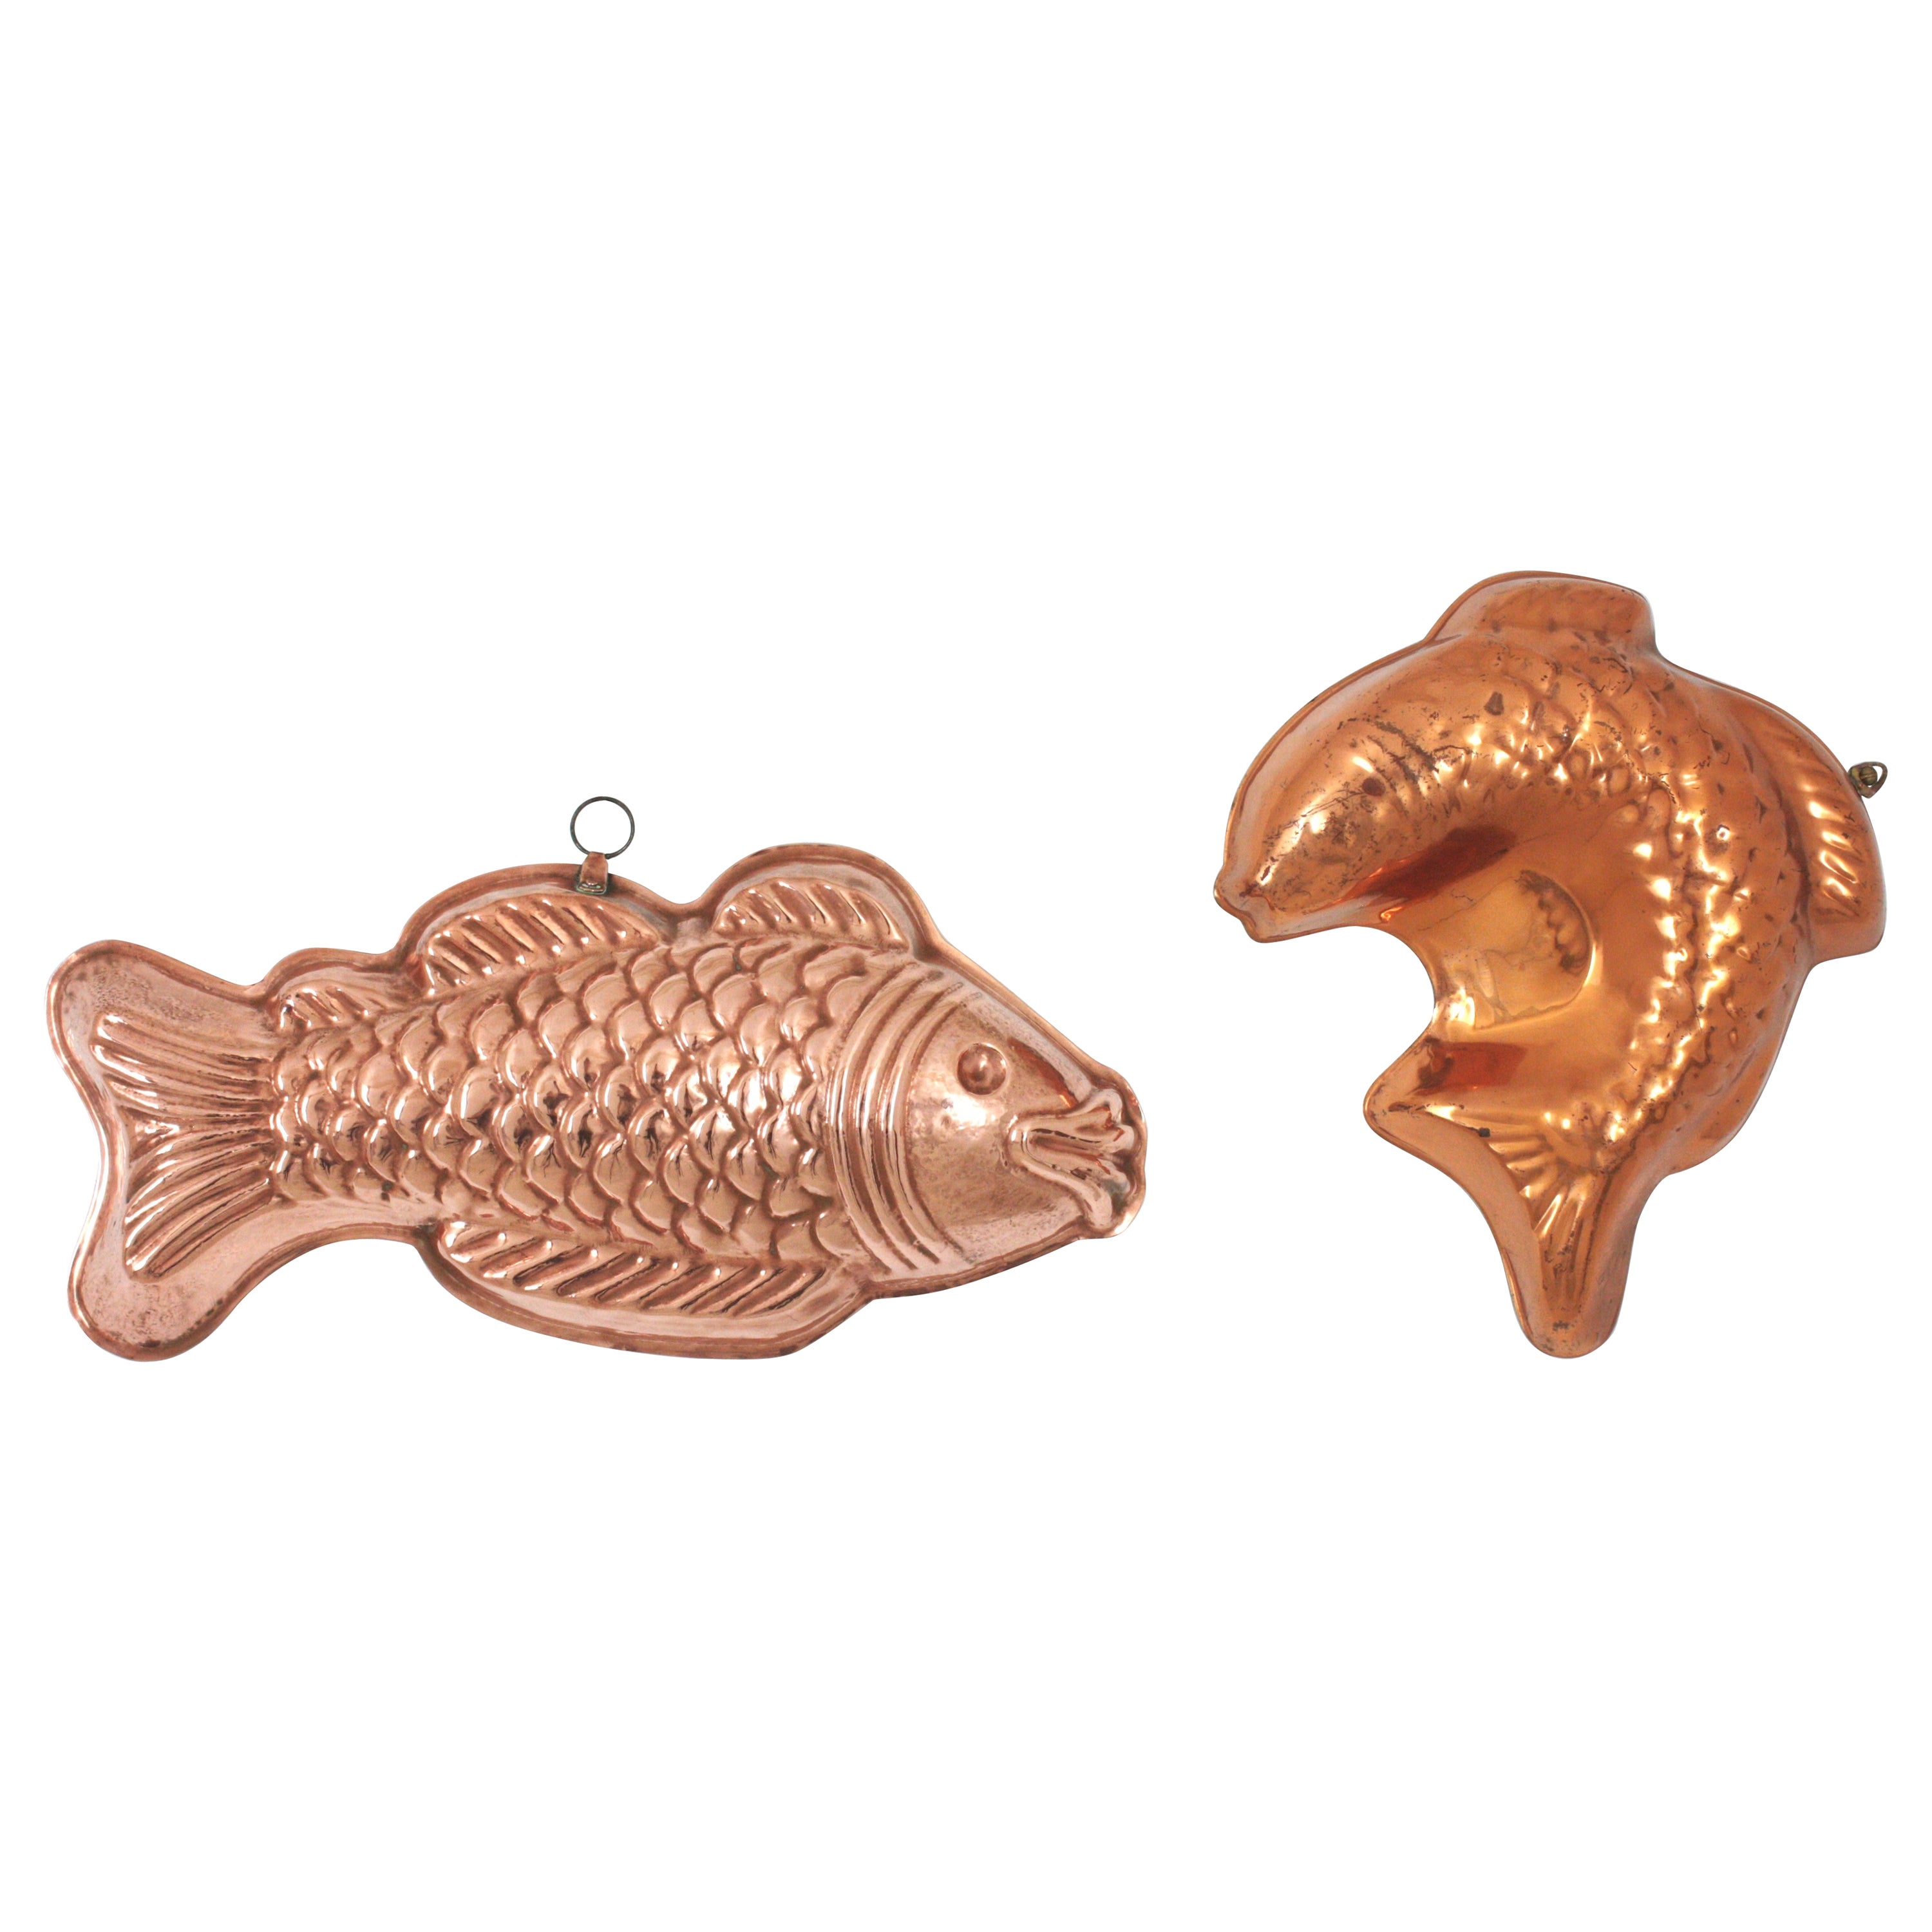 Unmatching Pair of Fish Copper Molds, Portugal, 1940s For Sale